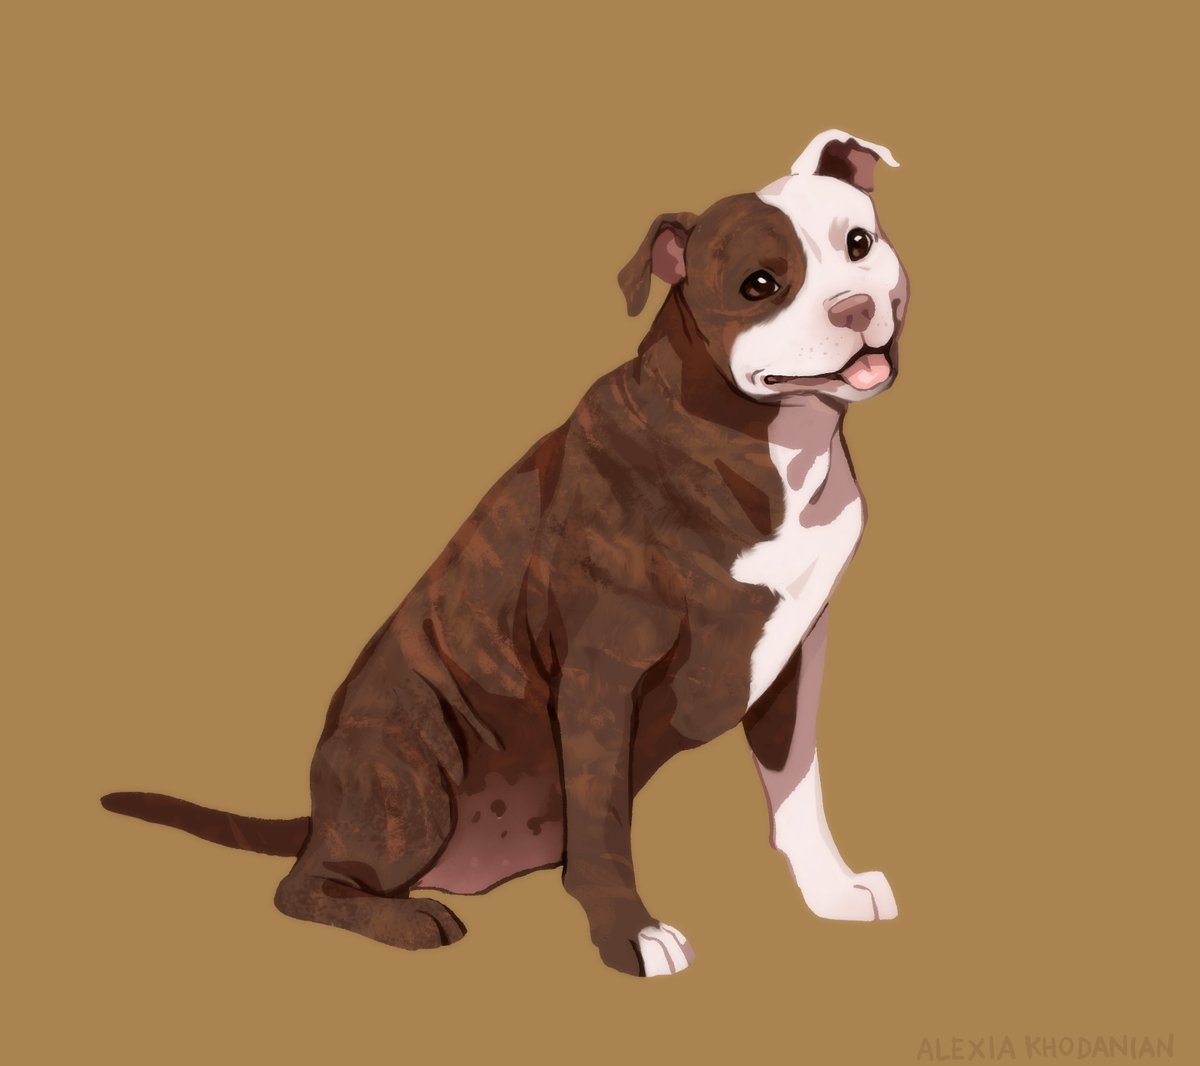  #doggust day 7 Pitbull...!!! There is an old white pitbull who goes to my dog park named Lucky. He is very sweet. They're a big fav of mine.